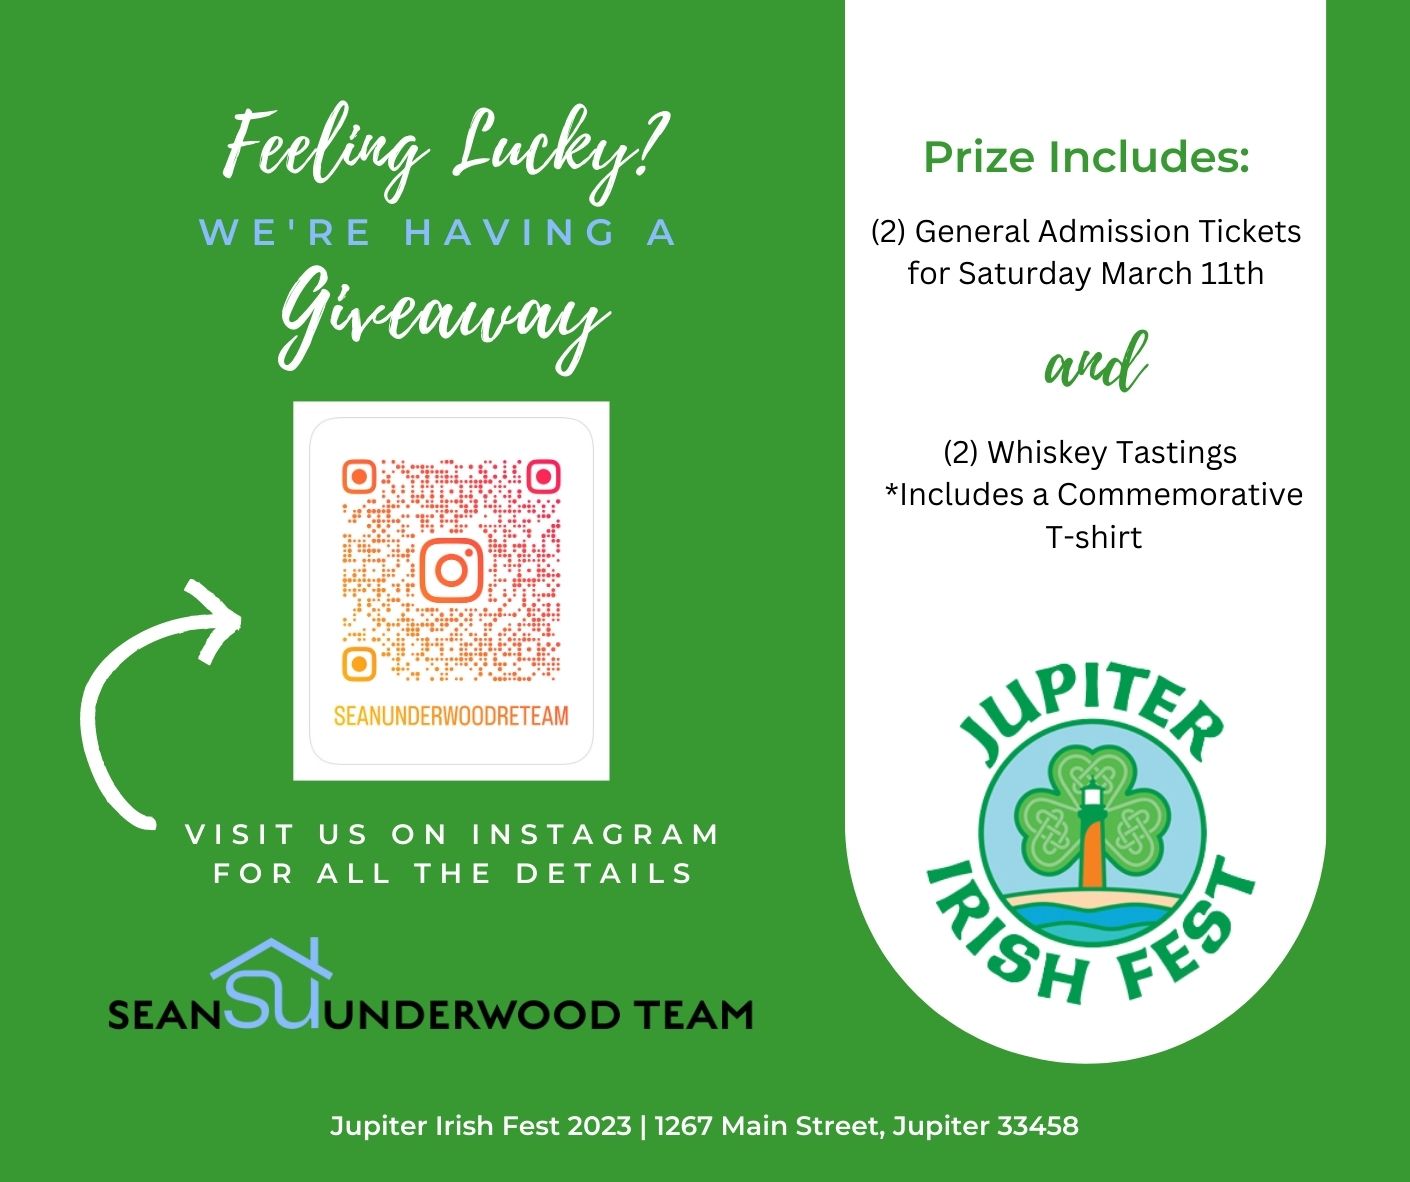 Feeling Lucky? We’re Having A Giveaway for St. Patrick’s Day